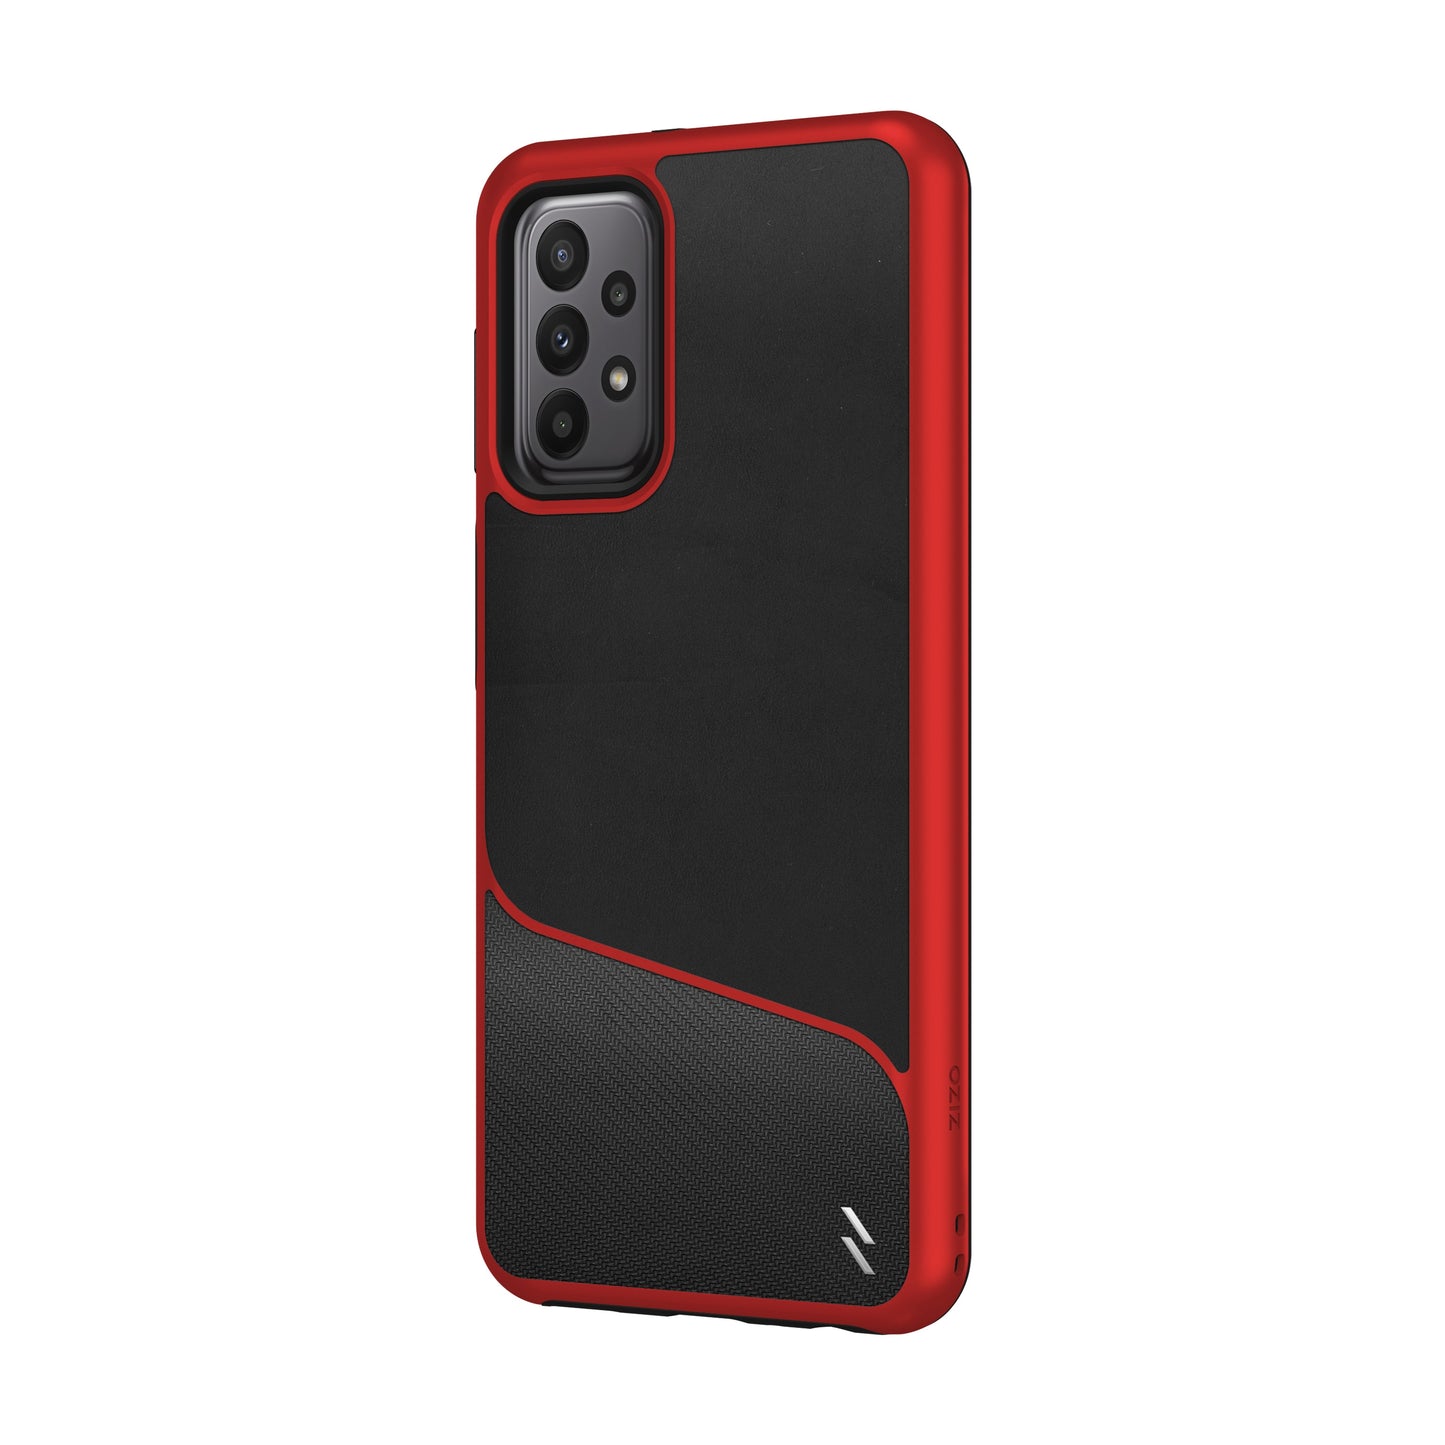 ZIZO DIVISION Series Galaxy A23 5G Case - Black & Red